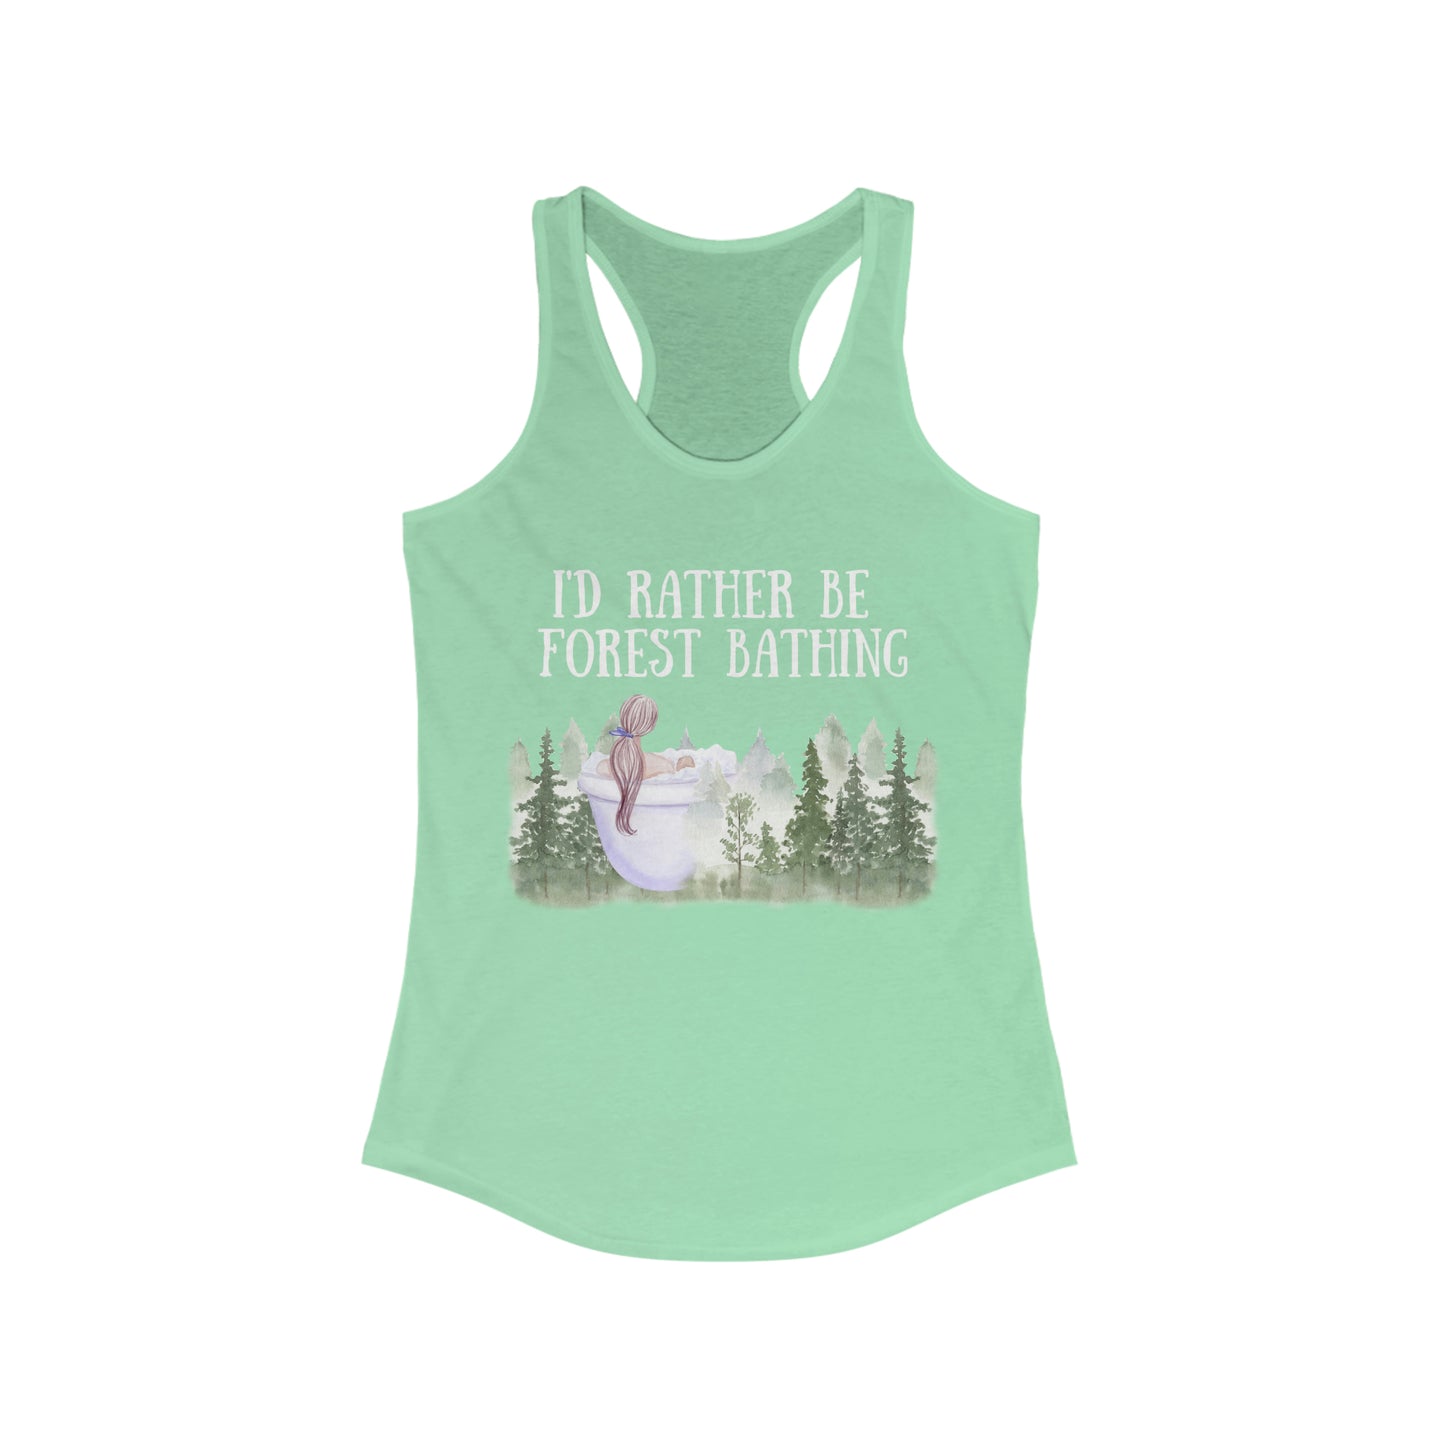 I'd Rather be Forest Bathing Tank